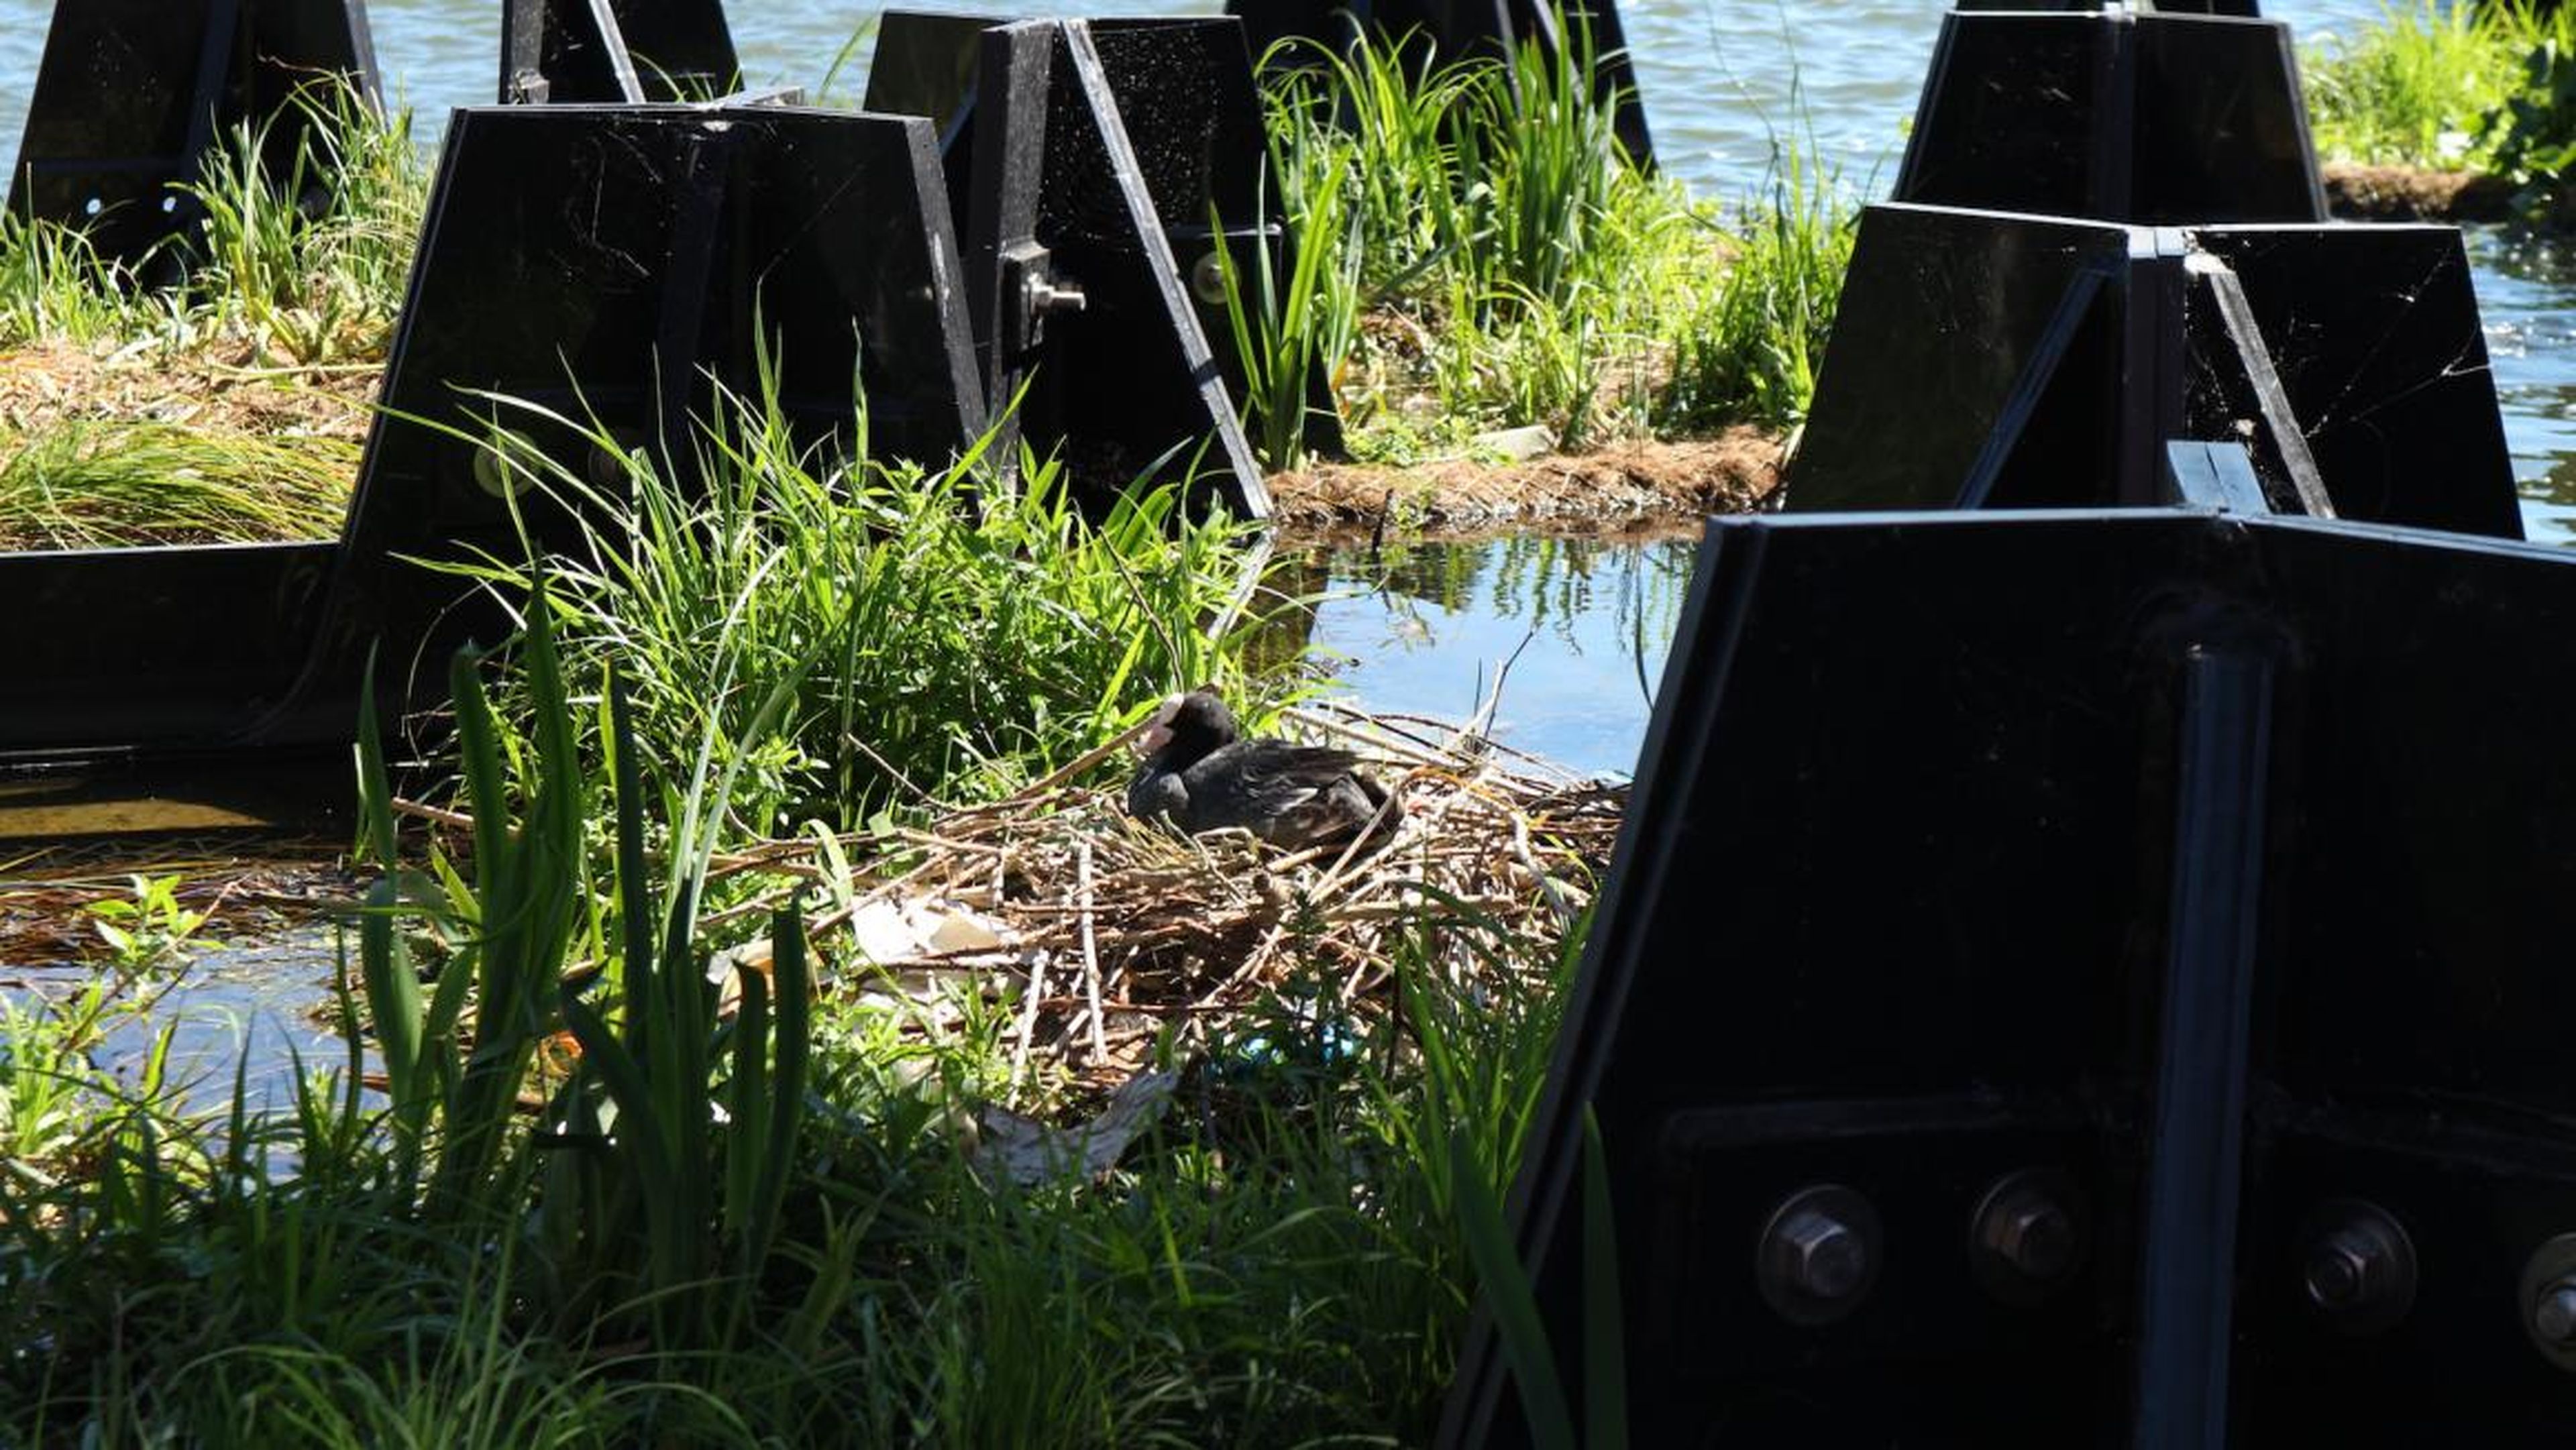 It's not just for humans, either. The Recycled Island Foundation says the park's plastic hexagons were designed to be prime habitat for native waterbirds, plants, fish, and even algae.